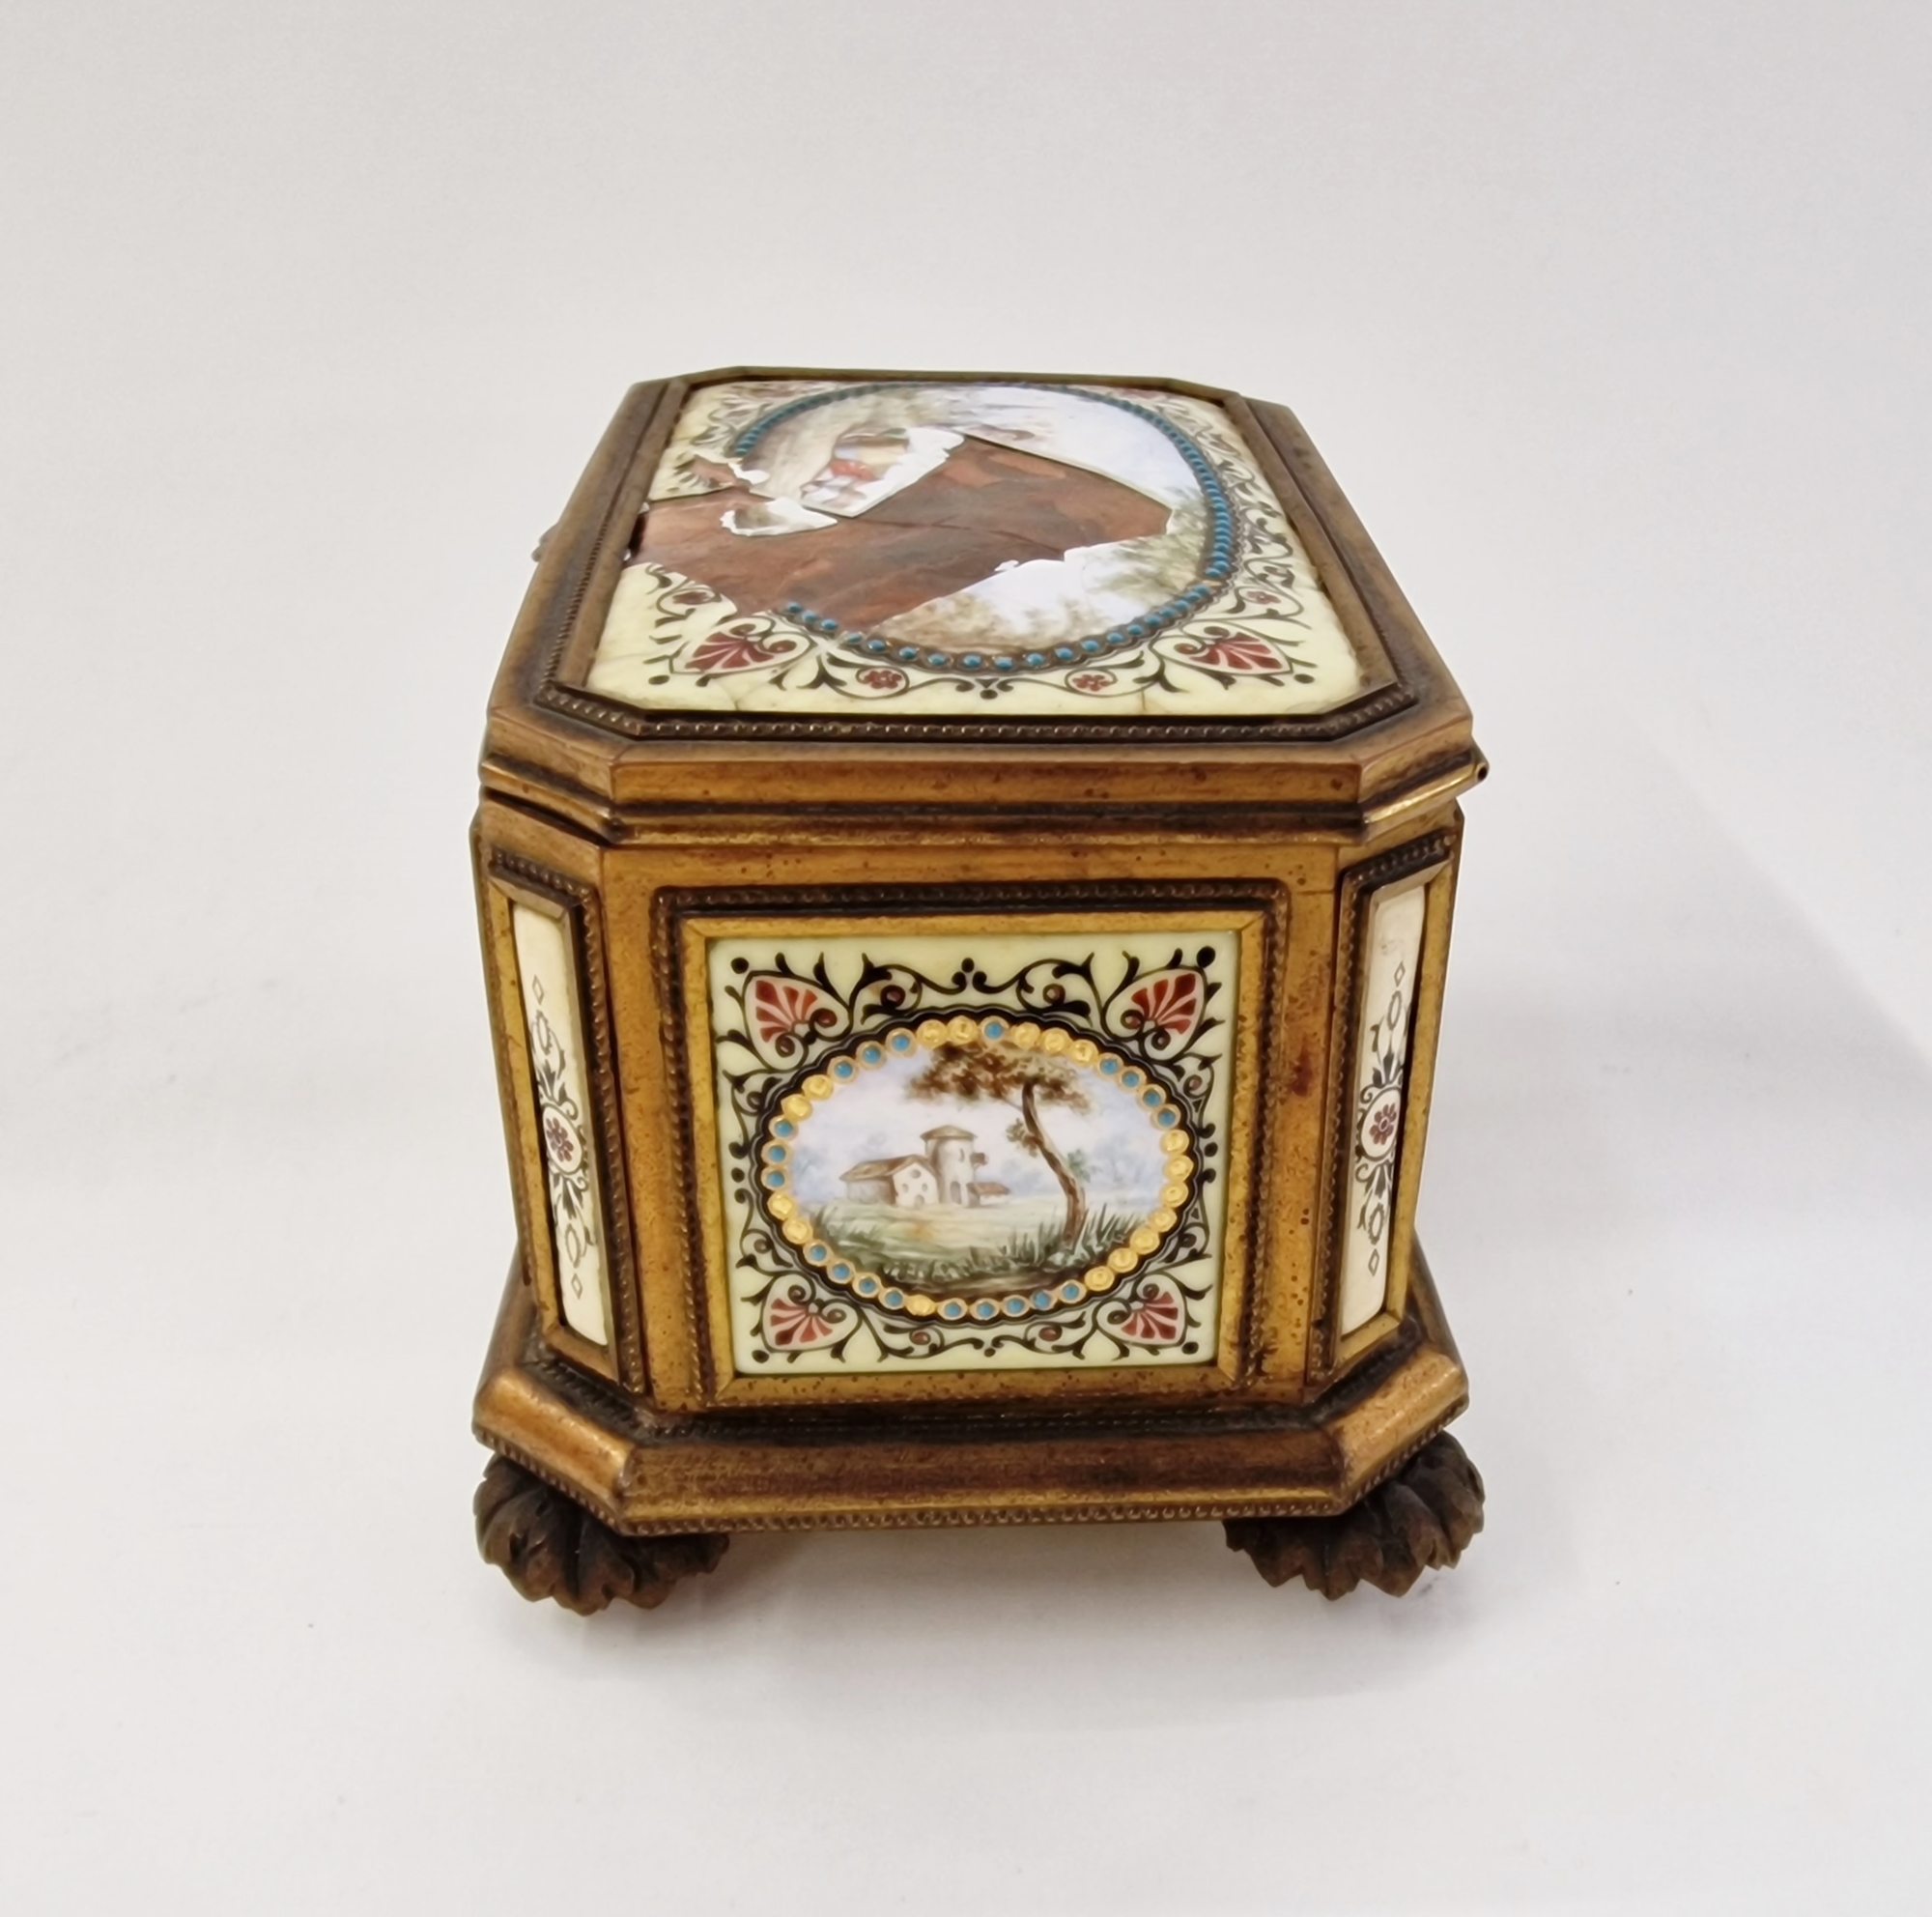 Late 19th century French enamel and gilt metal-mounted jewellery casket, of canted rectangular - Image 3 of 8